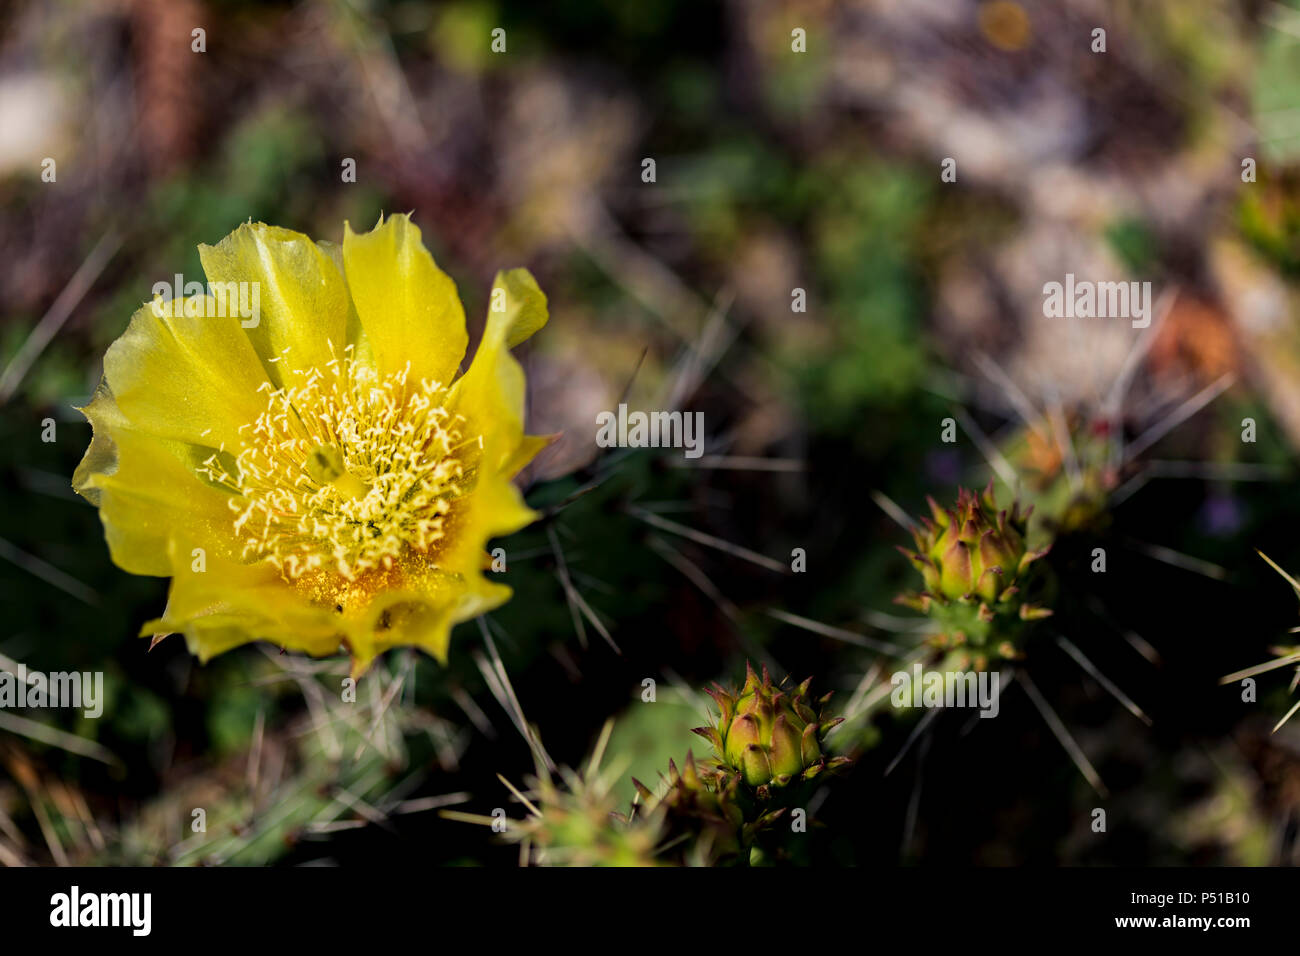 Detail of prickly pear cactus (Opuntia phaeacantha) blooming Stock Photo